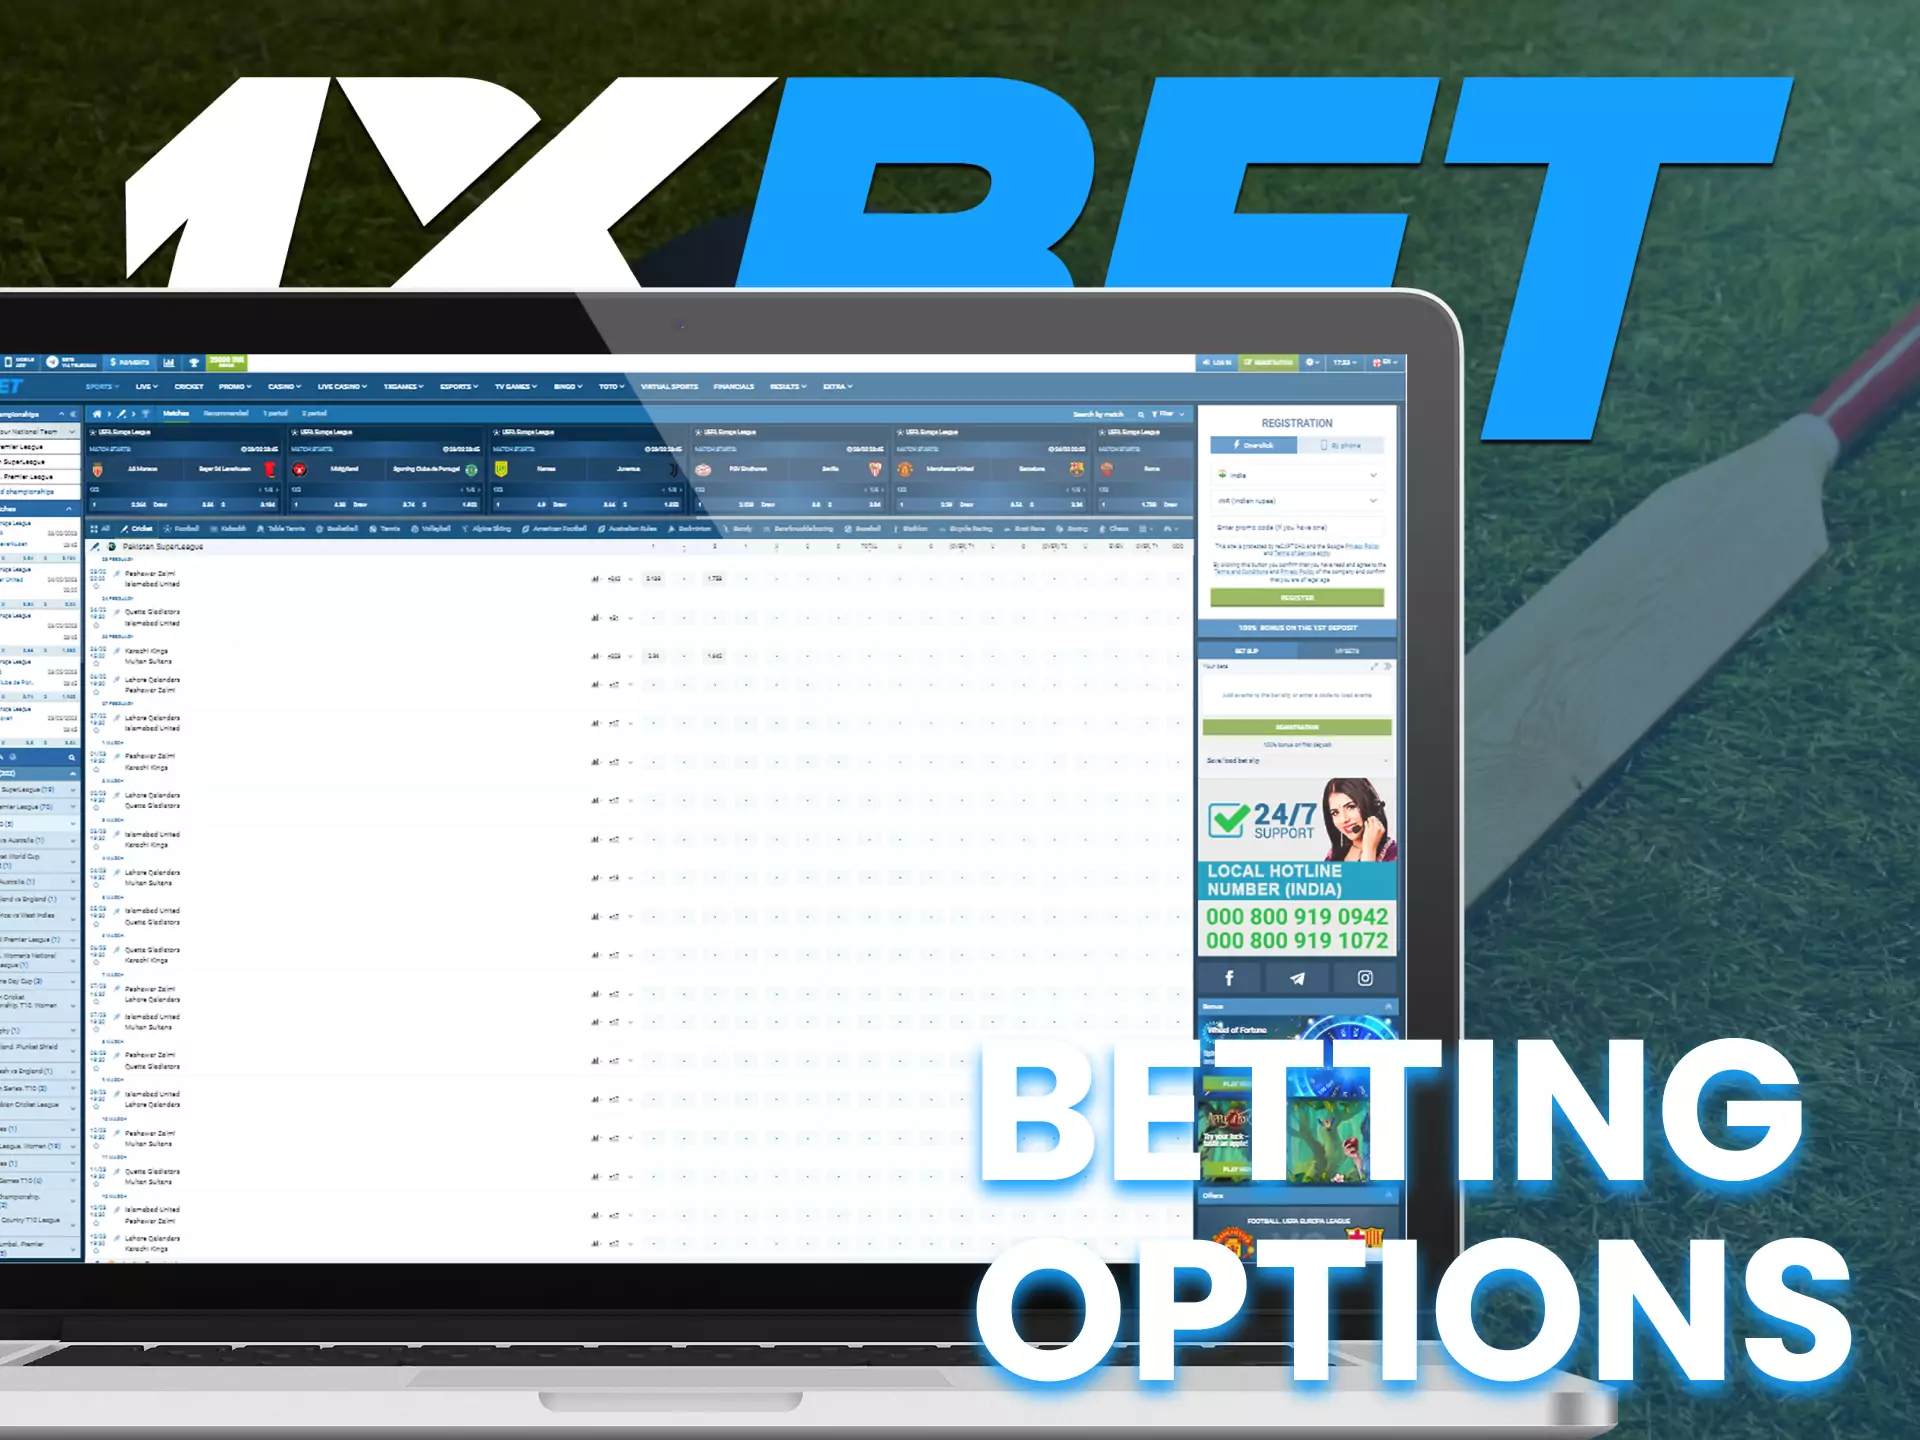 1XBET has various options for betting.